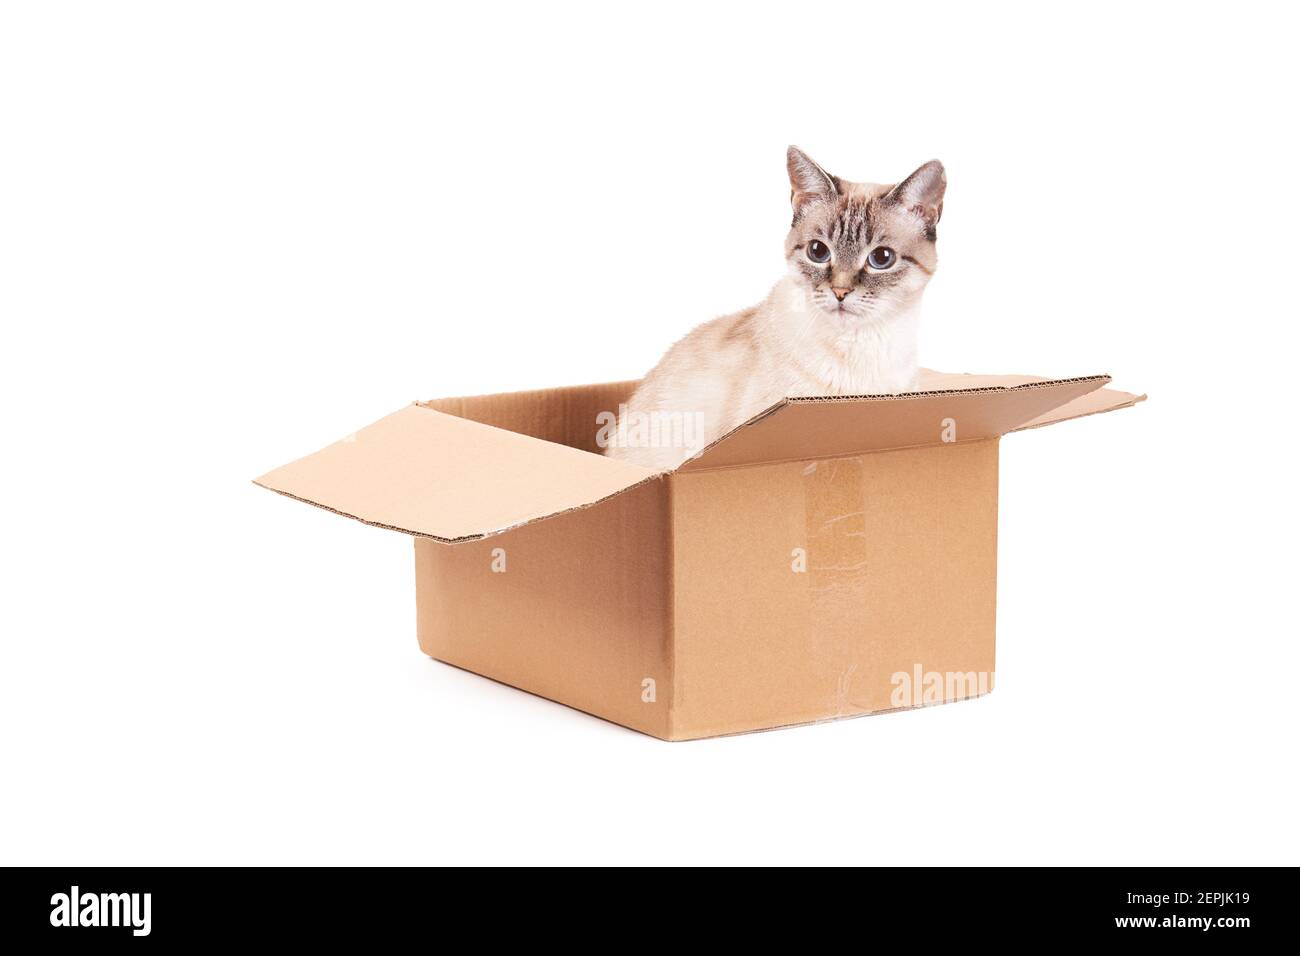 Domestic tabby cat is sitting in a cardboard box. Isolated on a white background. The concept of mail, delivery and shipping Stock Photo